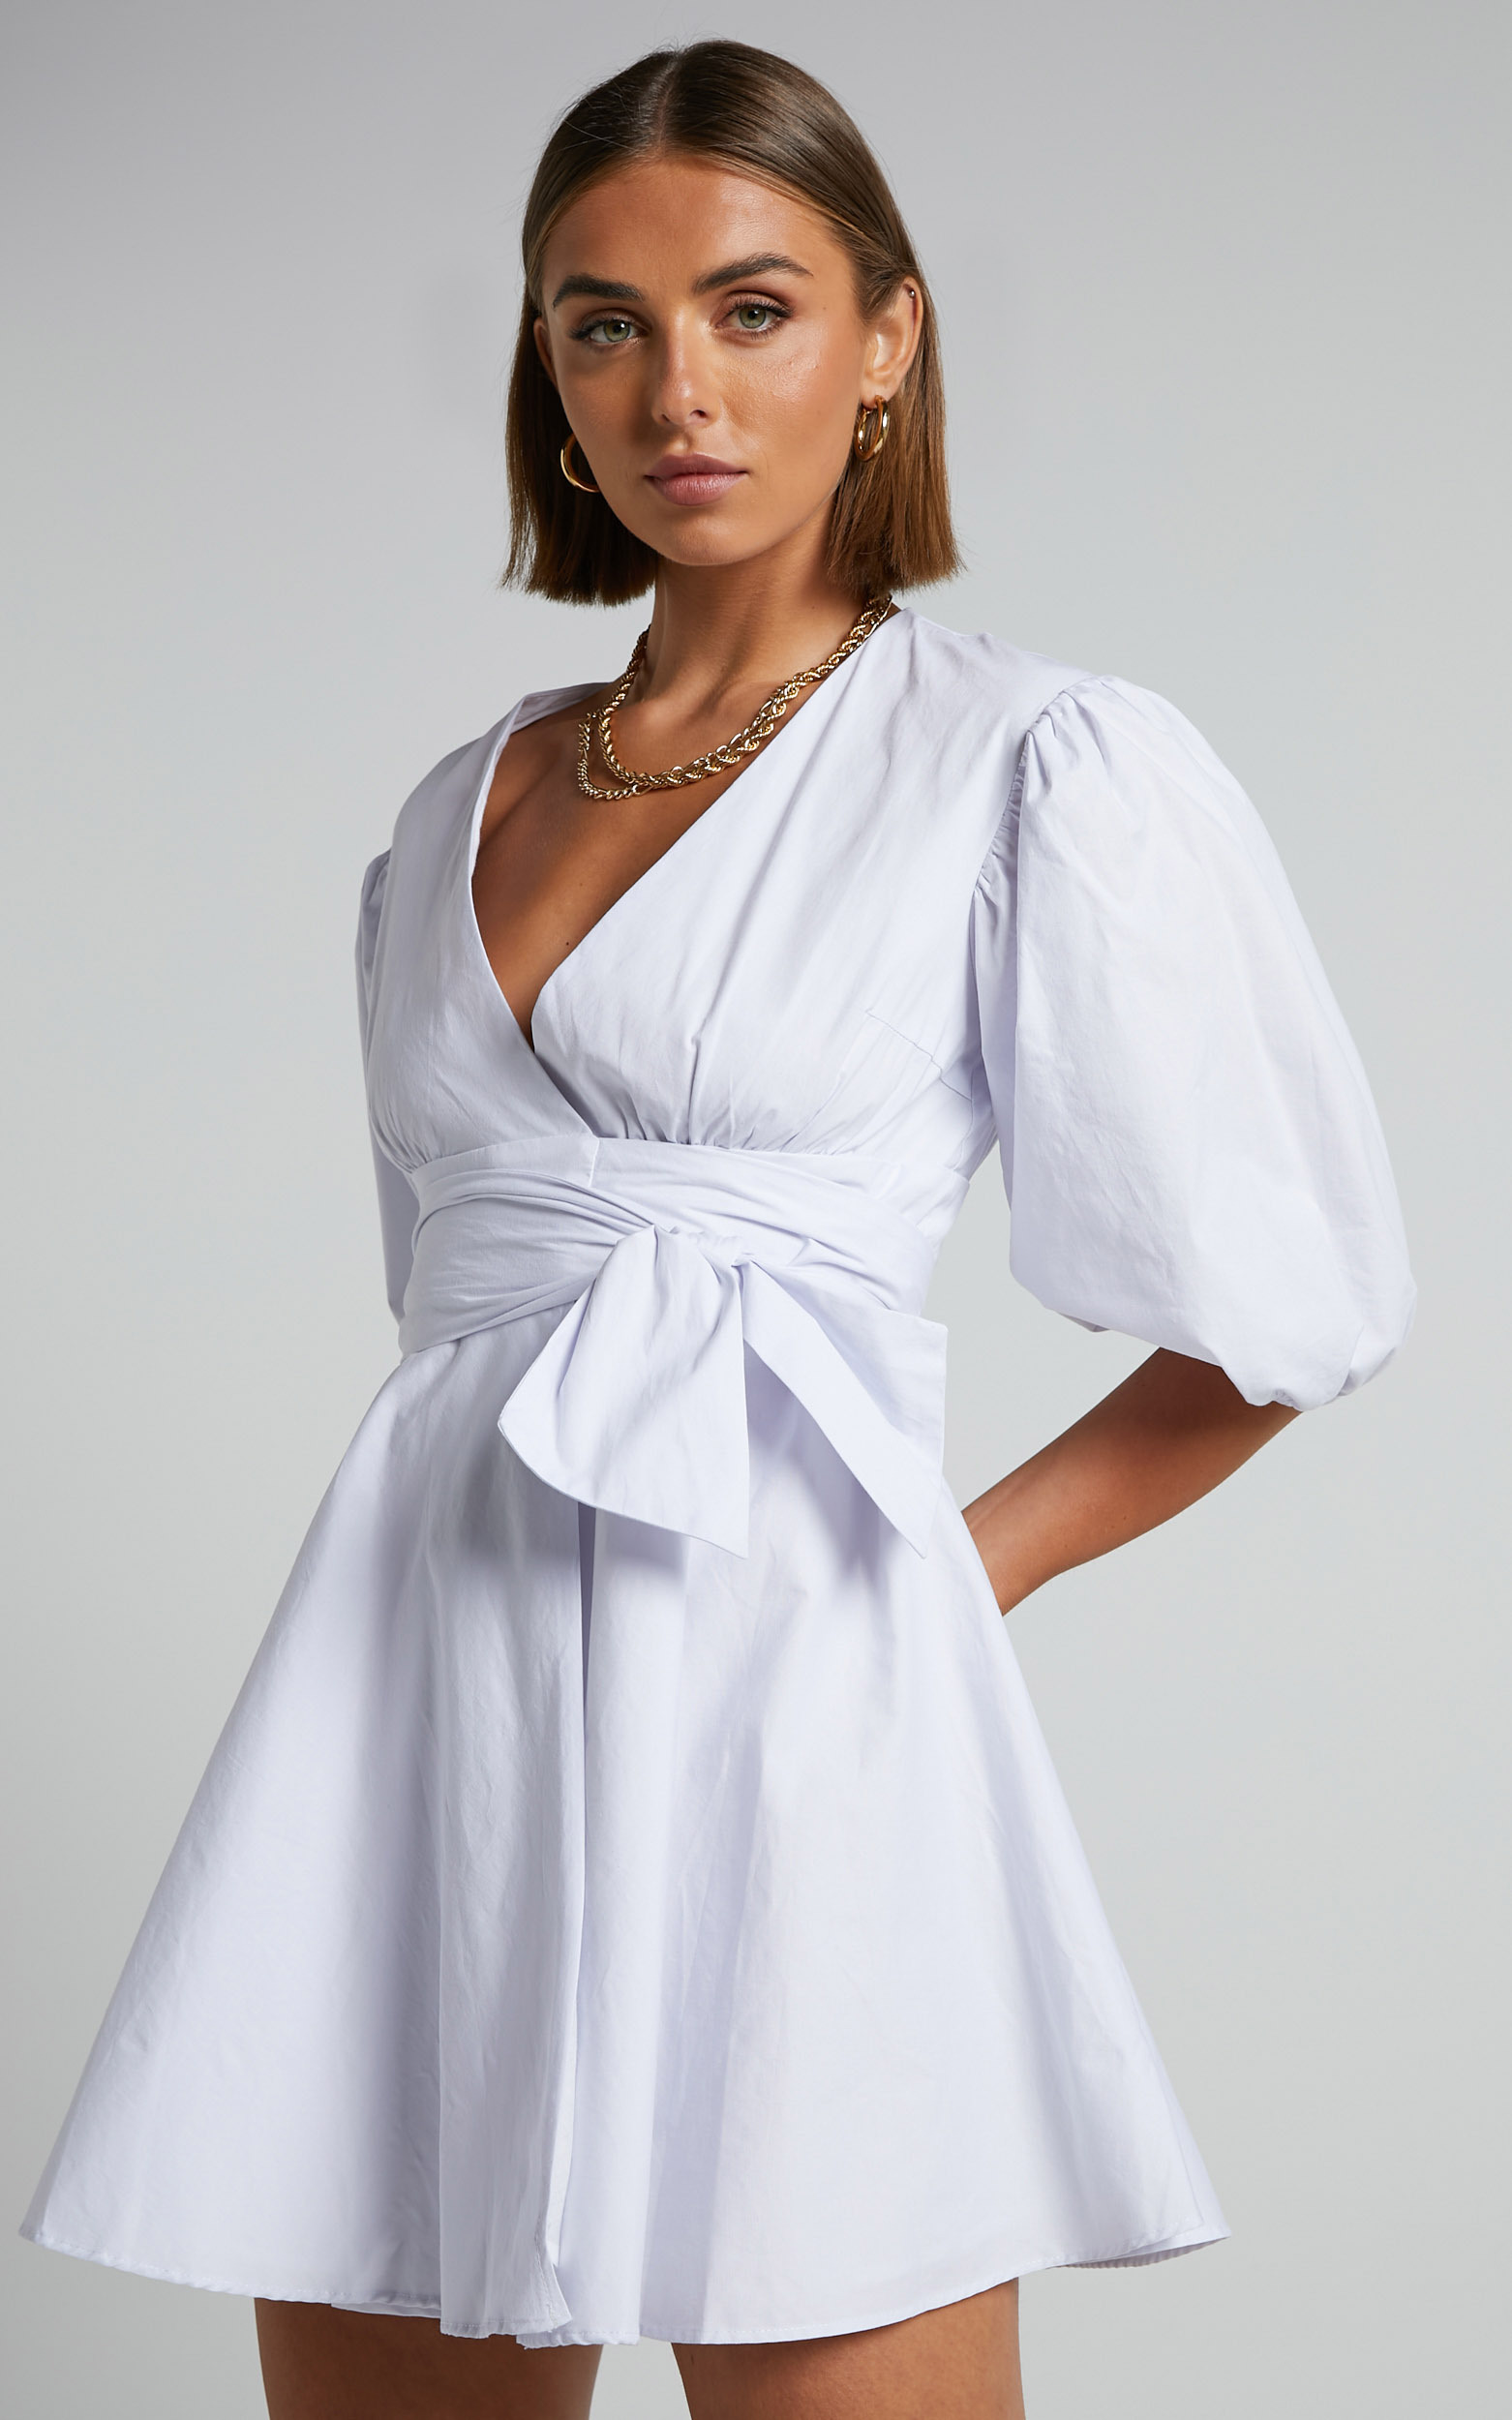 Zyla Puff Sleeve Wrap Mini Dress in White - 04, WHT4, hi-res image number null